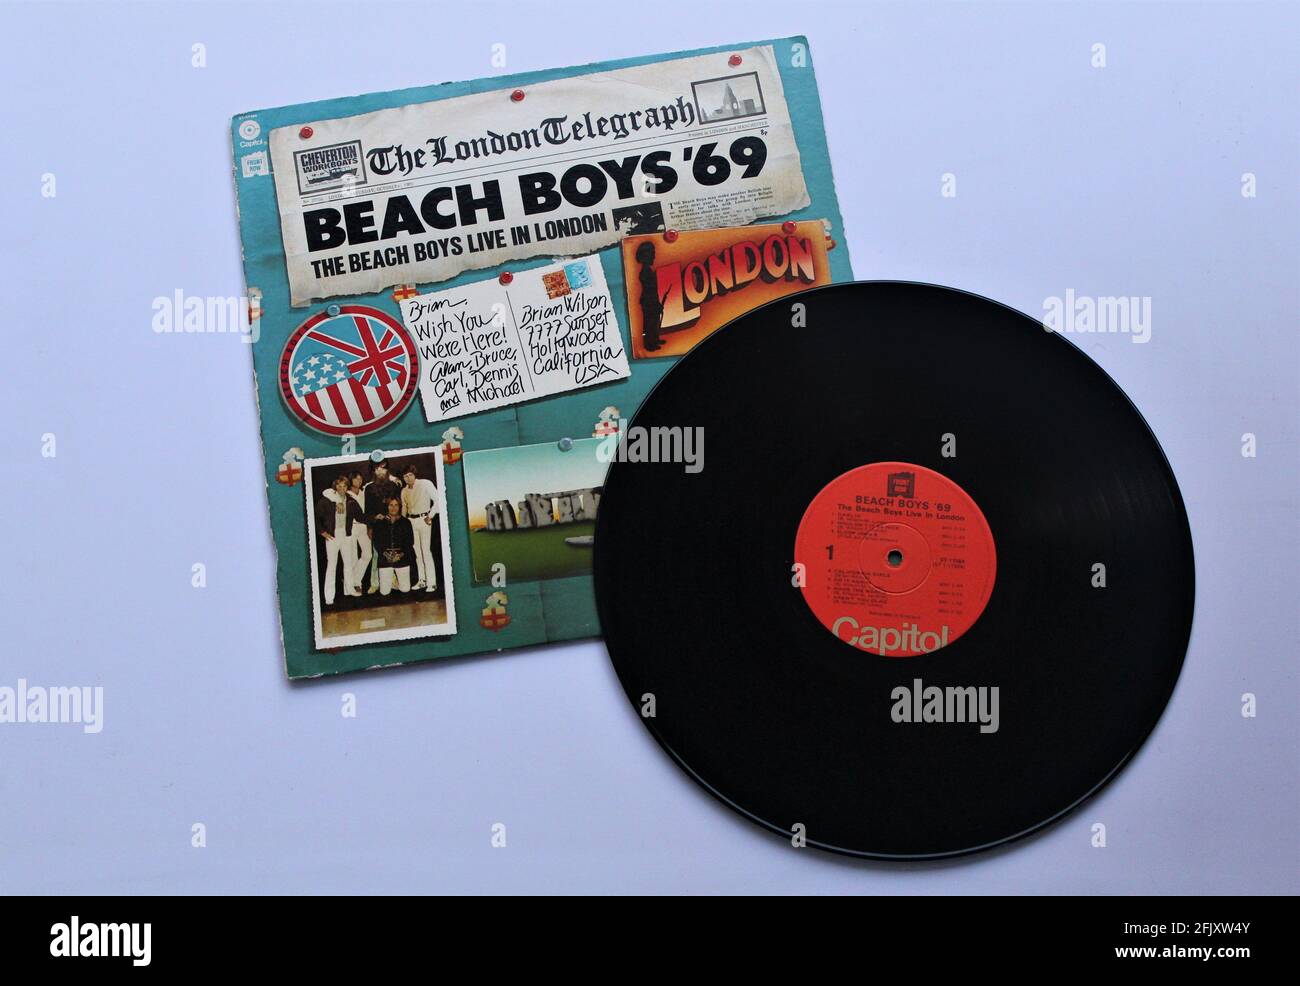 Classic rock band, The Beach Boys music album on vinyl record LP disc. Titled Live In London 1969 Stock Photo